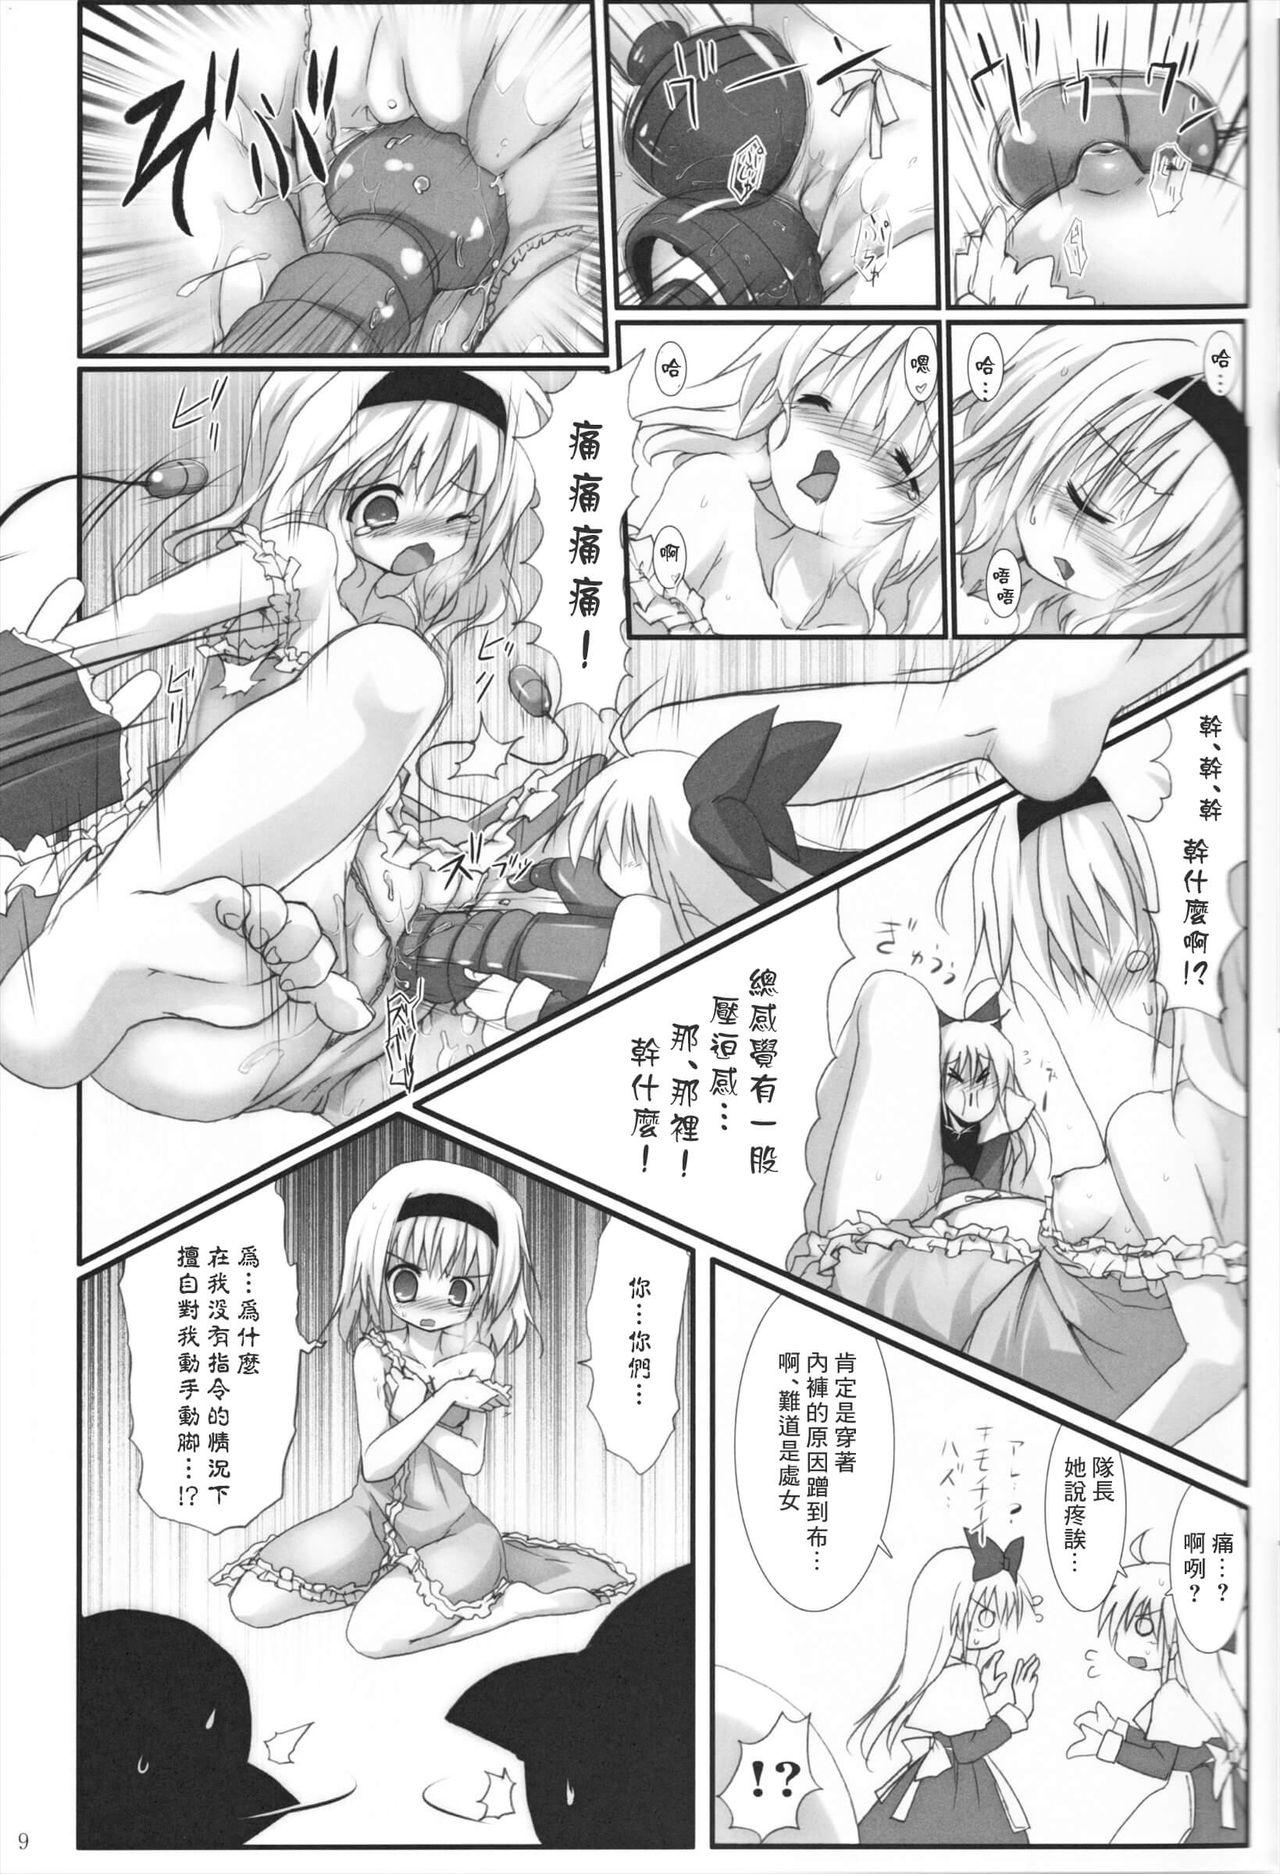 Uniform Alice in Nightmare - Touhou project Upskirt - Page 10